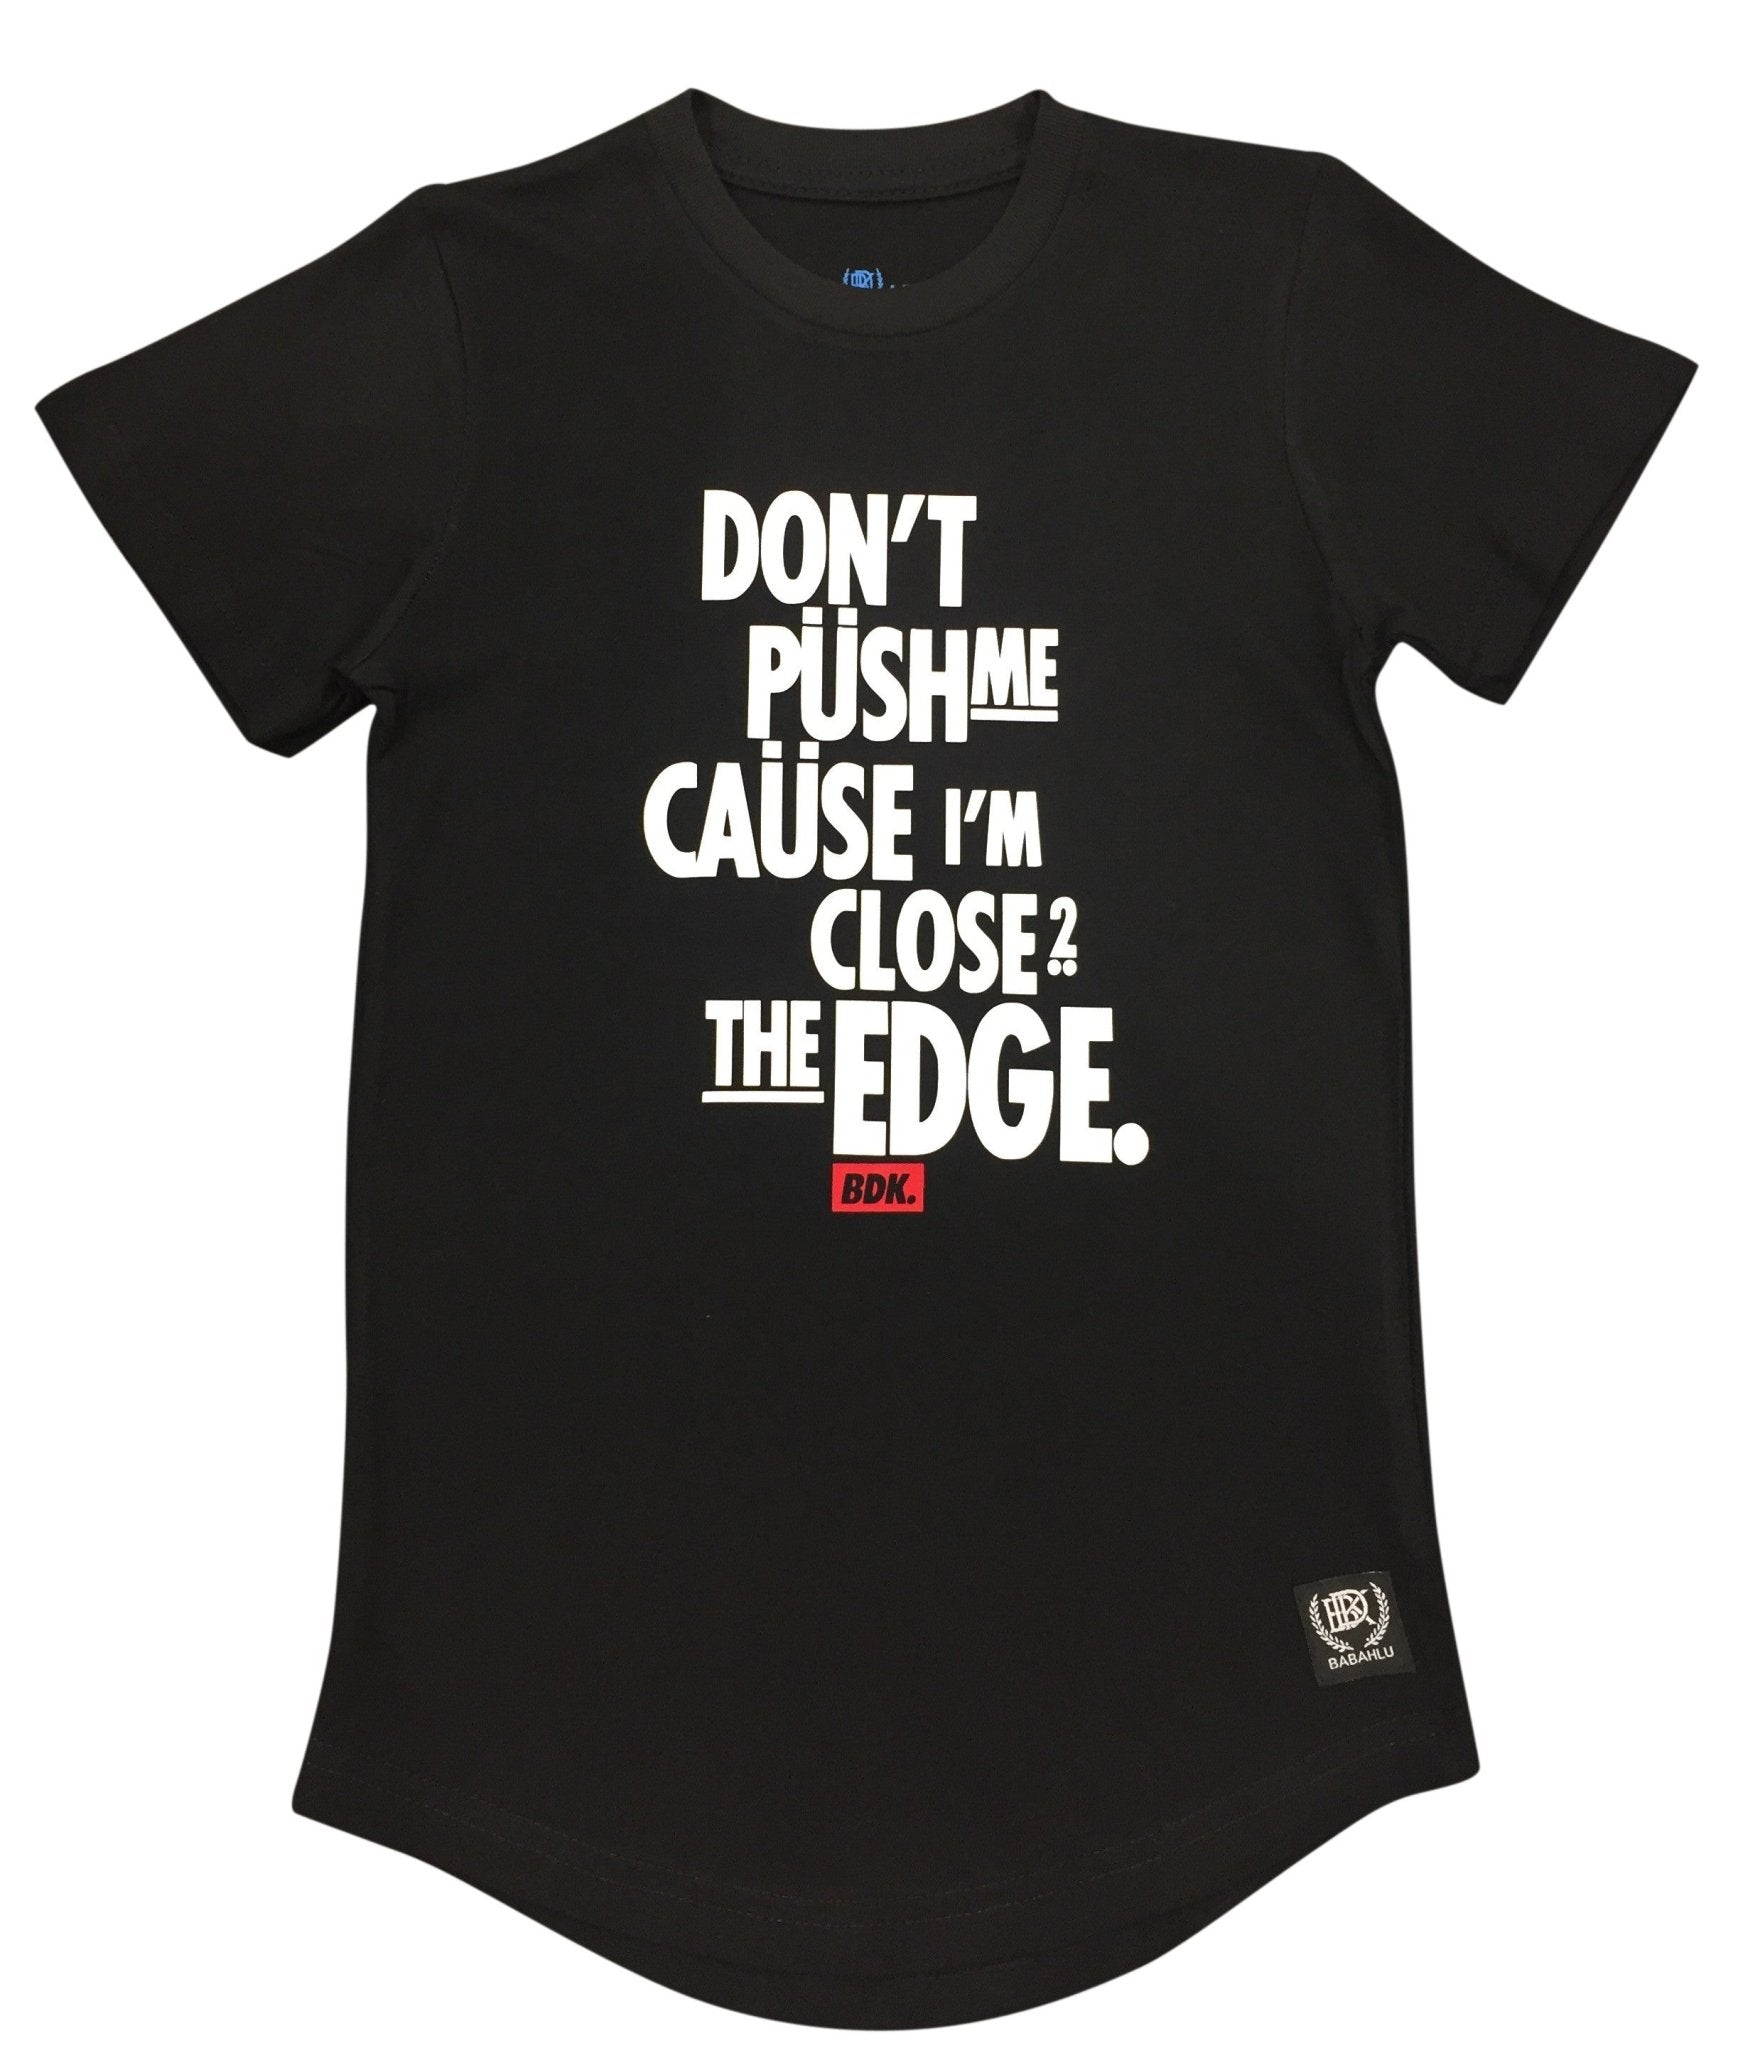 "Don't Push Me Cause Im close to the Edge" T Shirt - Babahlu Kids